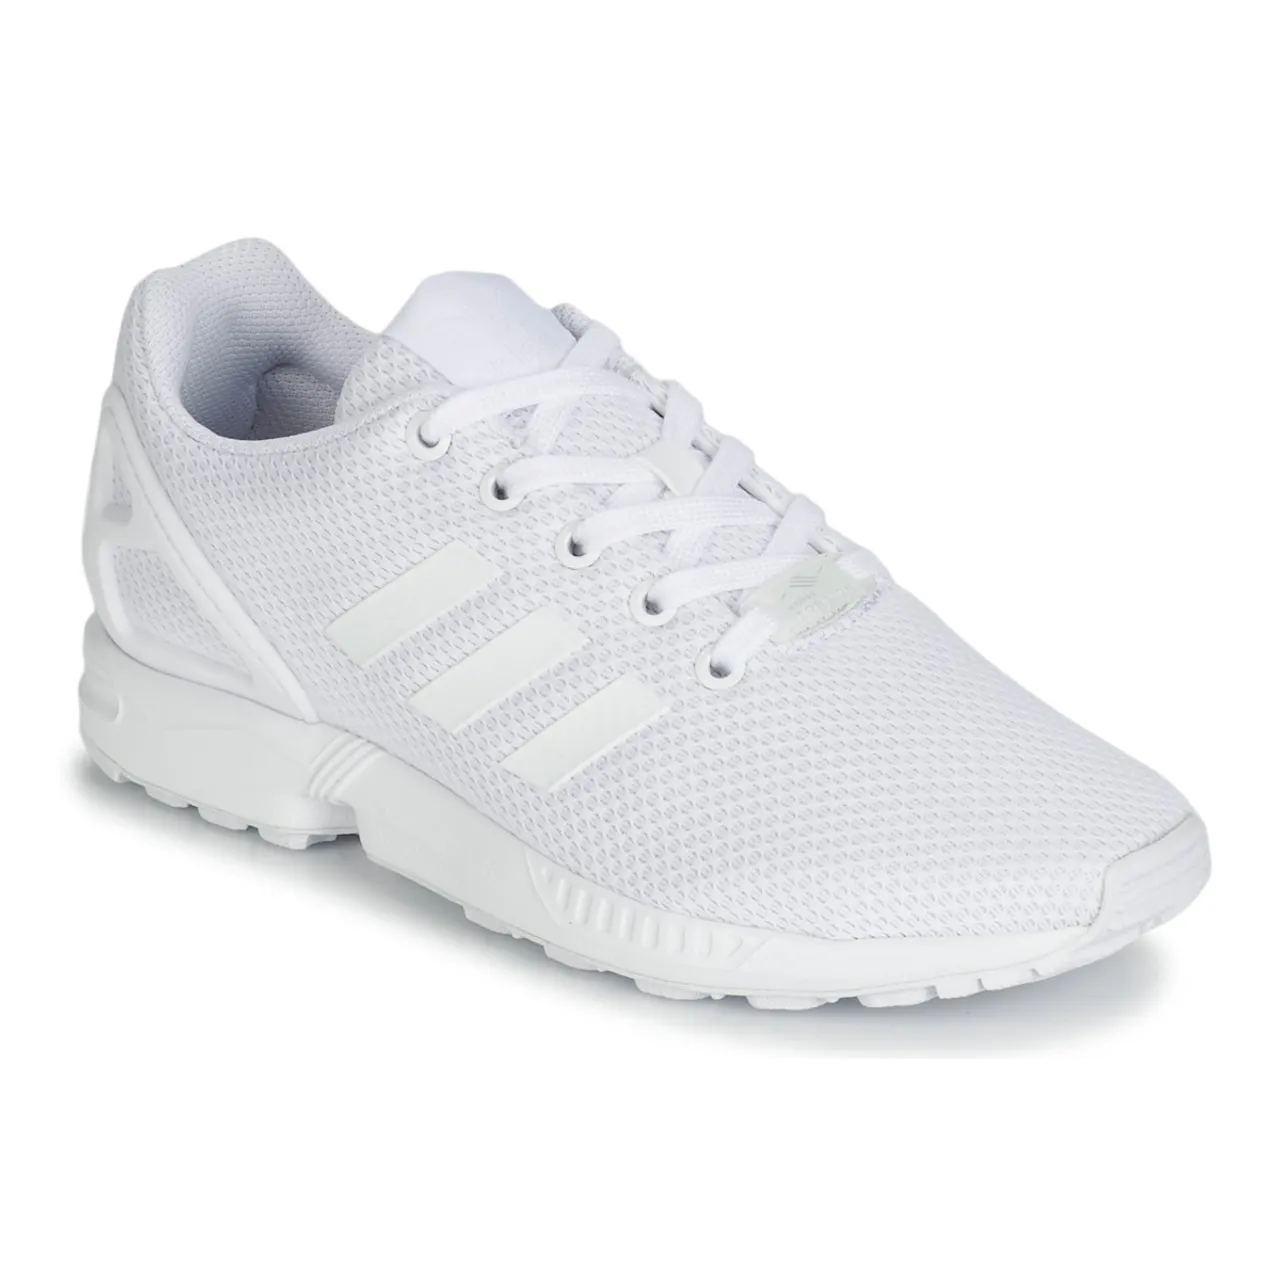 adidas  ZX FLUX J  boys's Children's Shoes (Trainers) in White